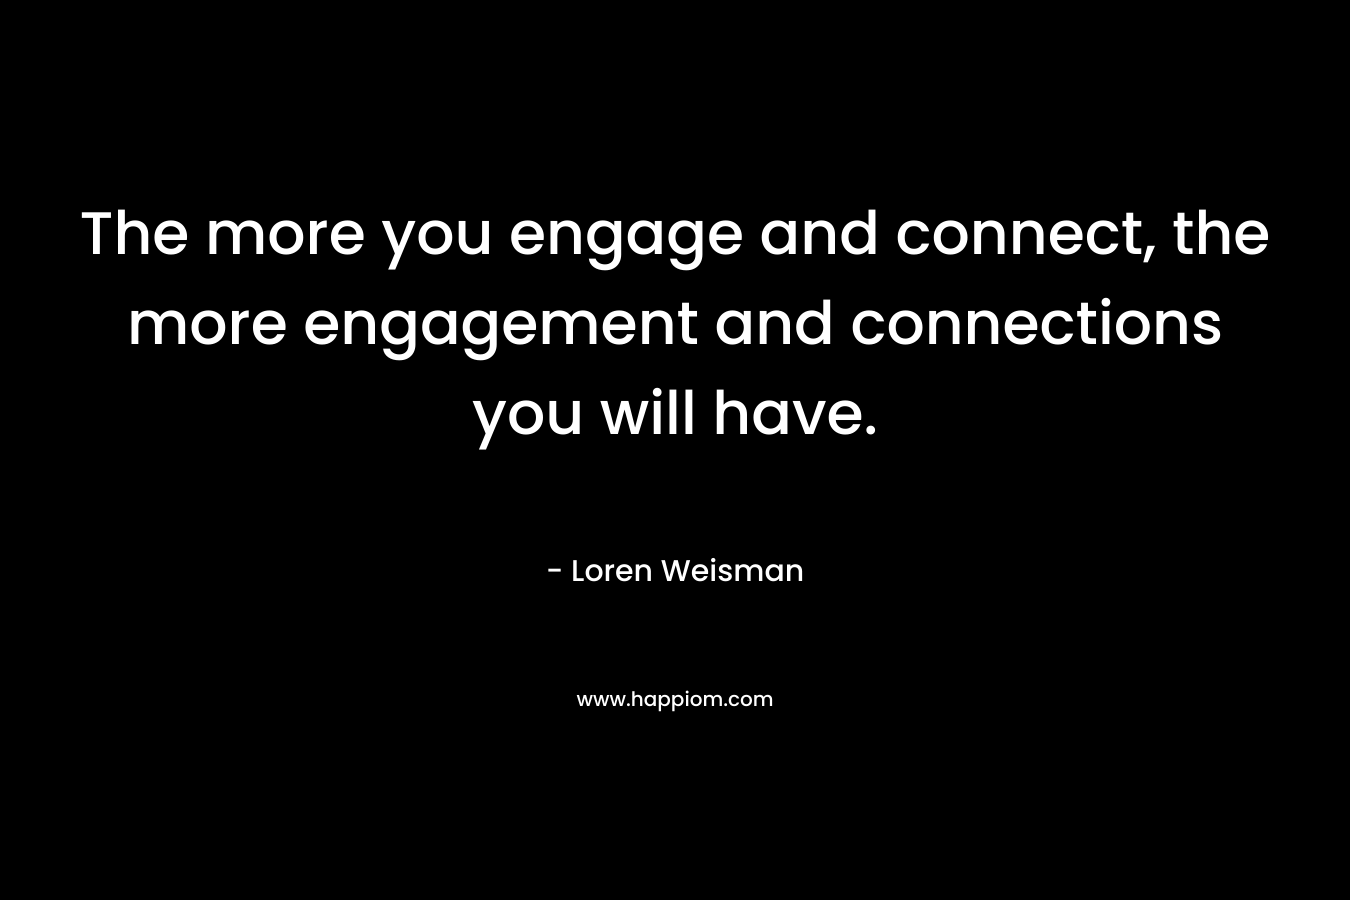 The more you engage and connect, the more engagement and connections you will have.